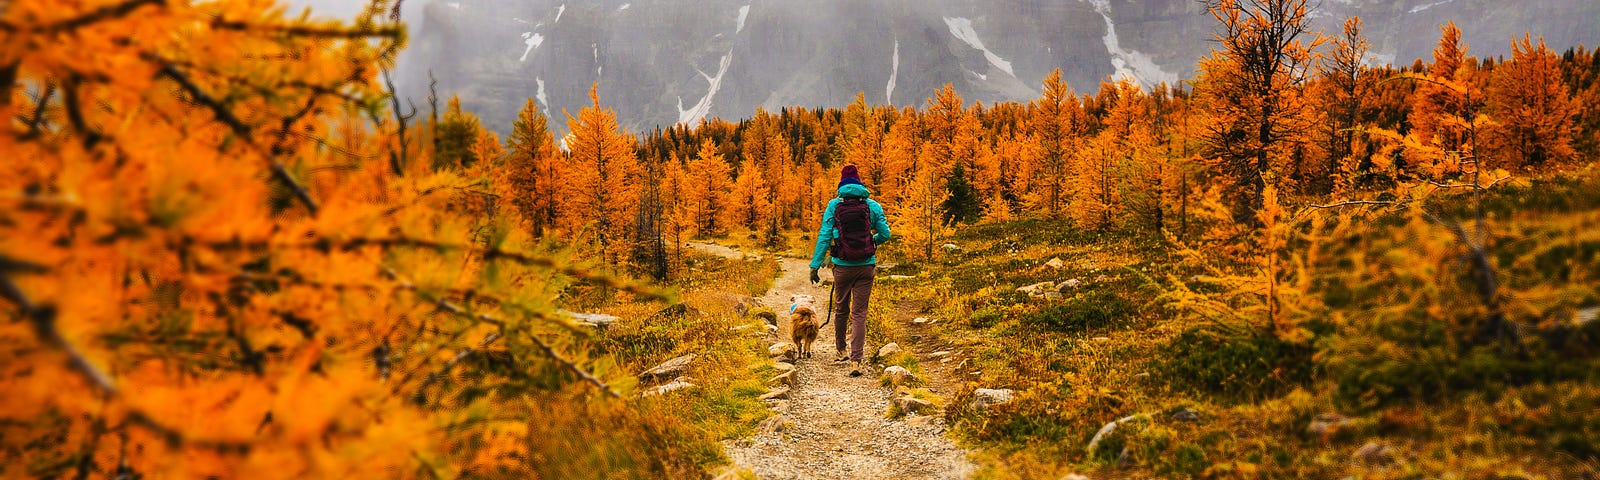 Man walking dog through autumnal trees and mountains in the distance.